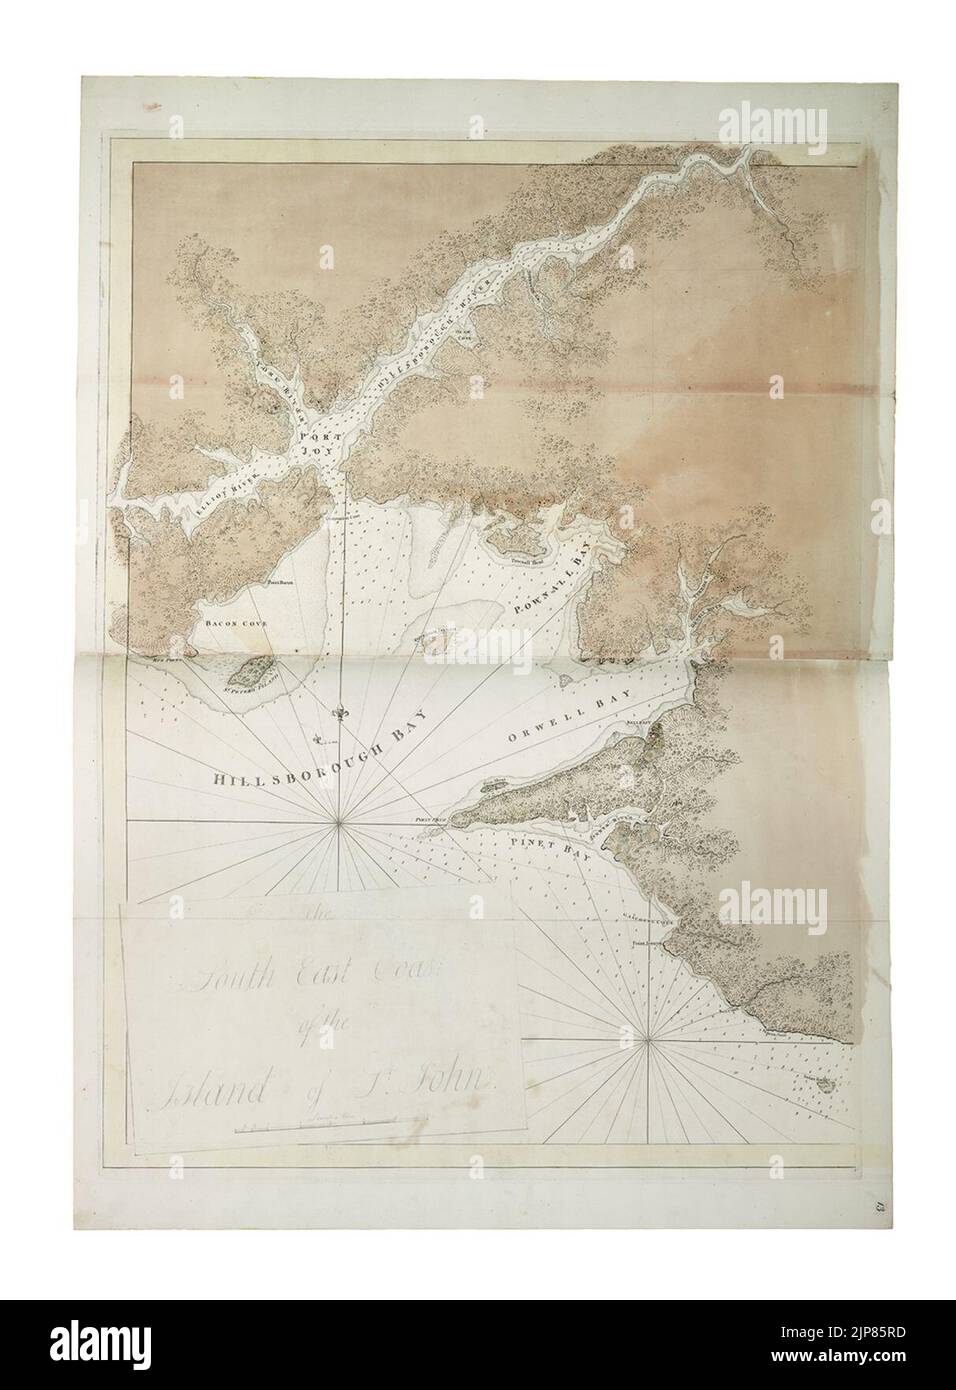 The south east coast of the Island of St. John, surveyed under the direction of the Right Honourable the Lords of Trade and Plantations- by Saml. Holland Esqr. Survr. Genl. of the Northern District of North America, and Stock Photo